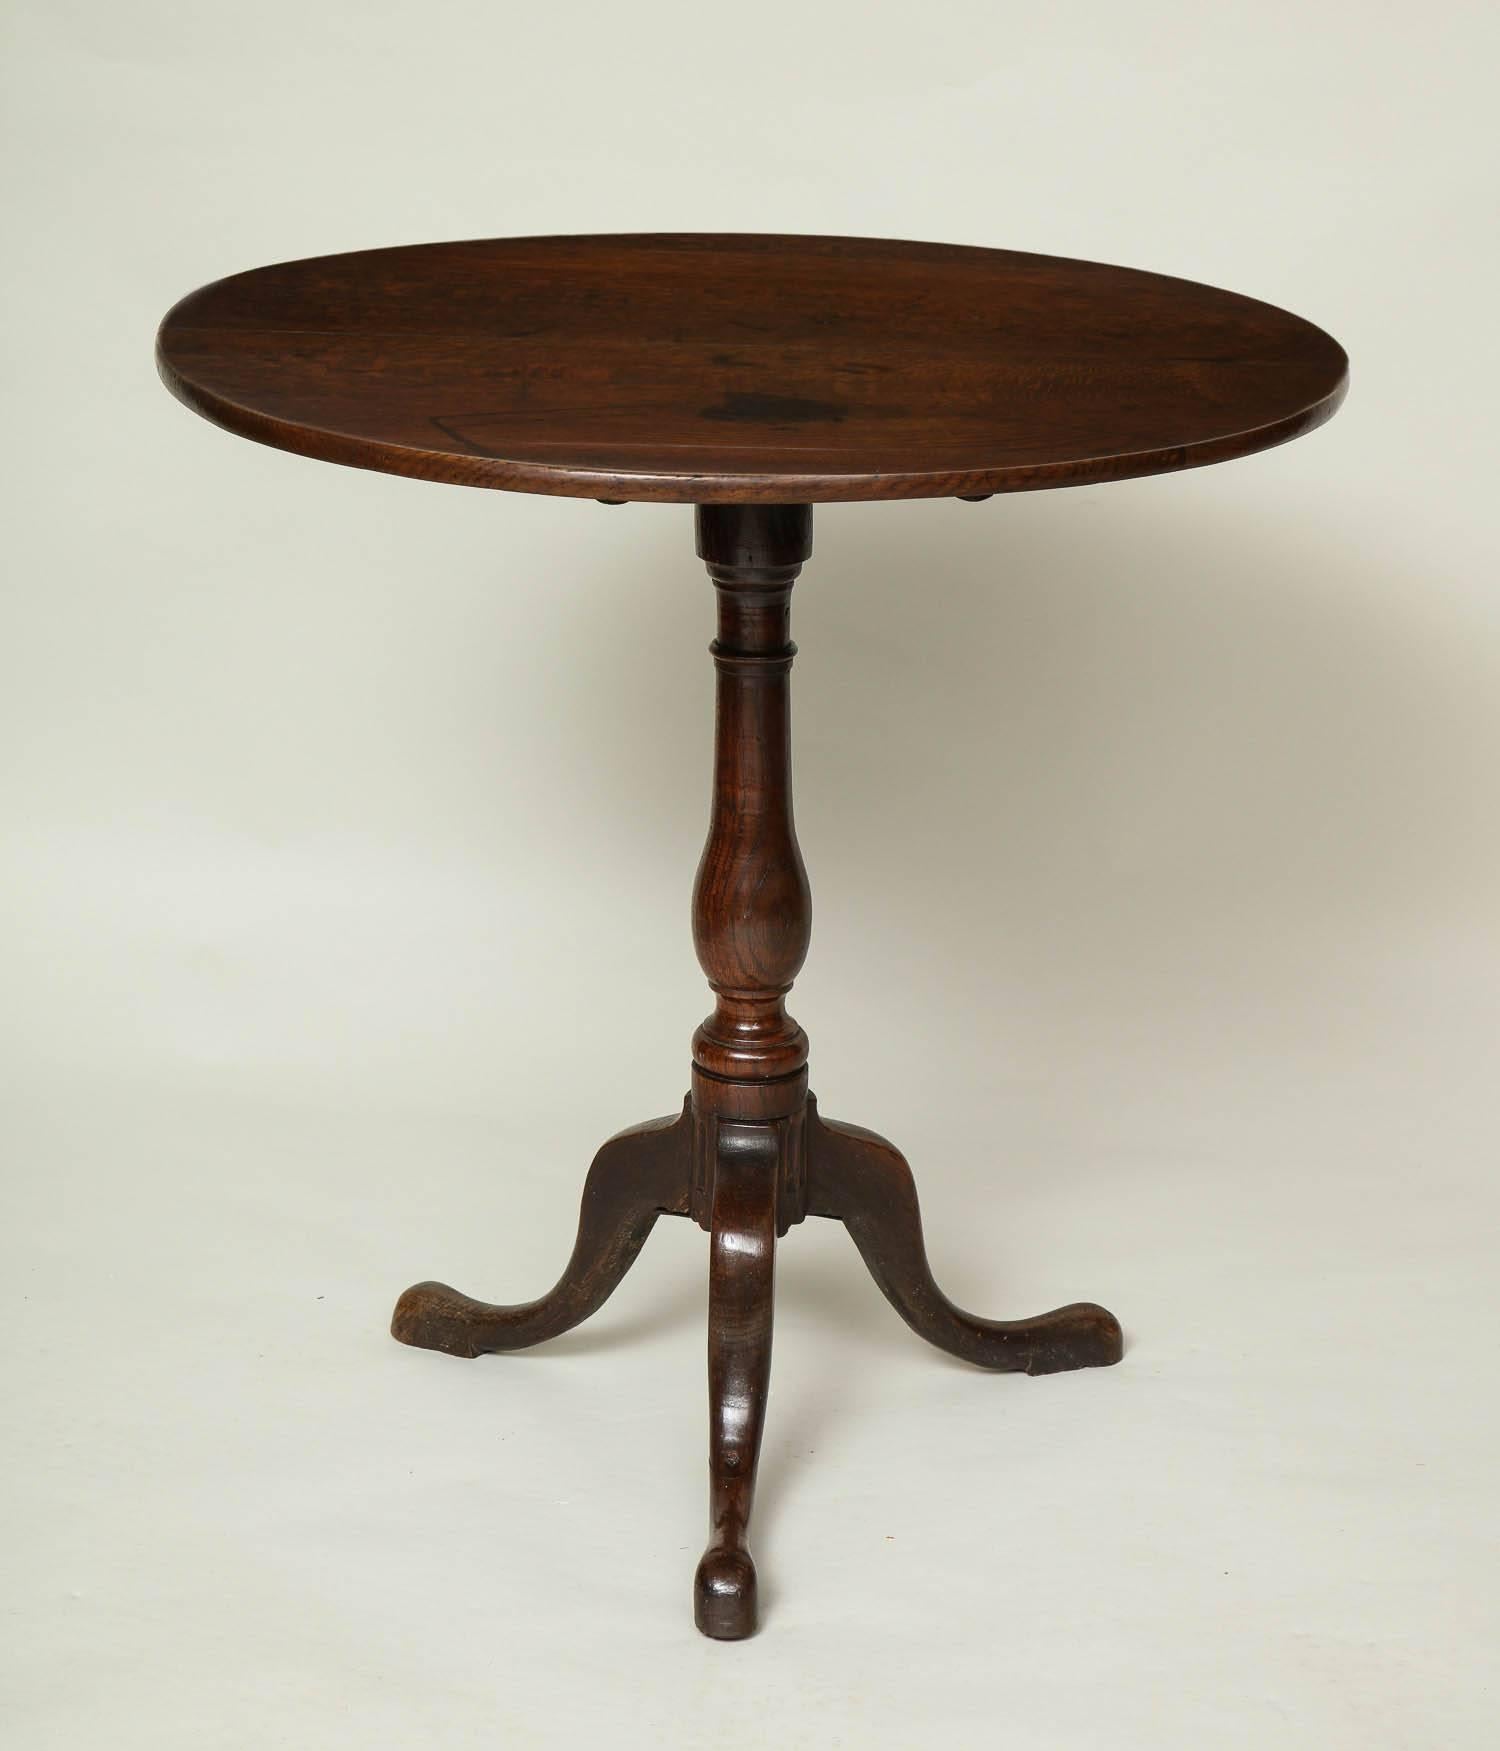 Good 18th century English oak circular table having a nicely patinated top over vase turned base with fluting to the base and standing on cabriole legs ending in slipper feet, England, circa 1770.